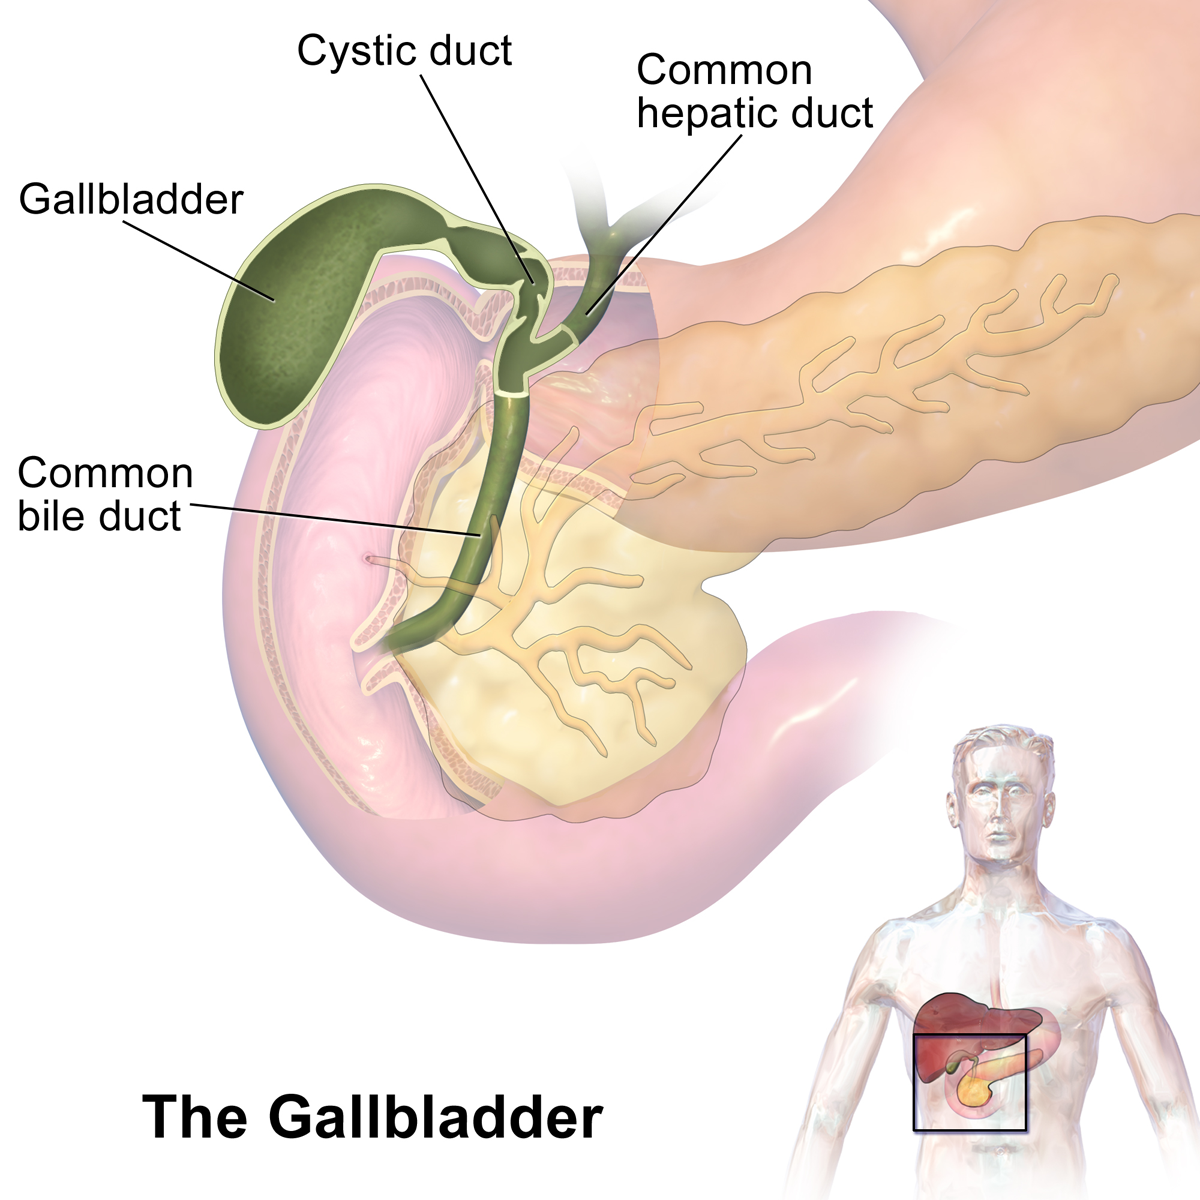 <ul><li><p>storage sac which holds bile from the liver.</p></li><li><p>bile salts can crystalize and form "stones" -called gallstones - which can block the bile duct.</p></li></ul>